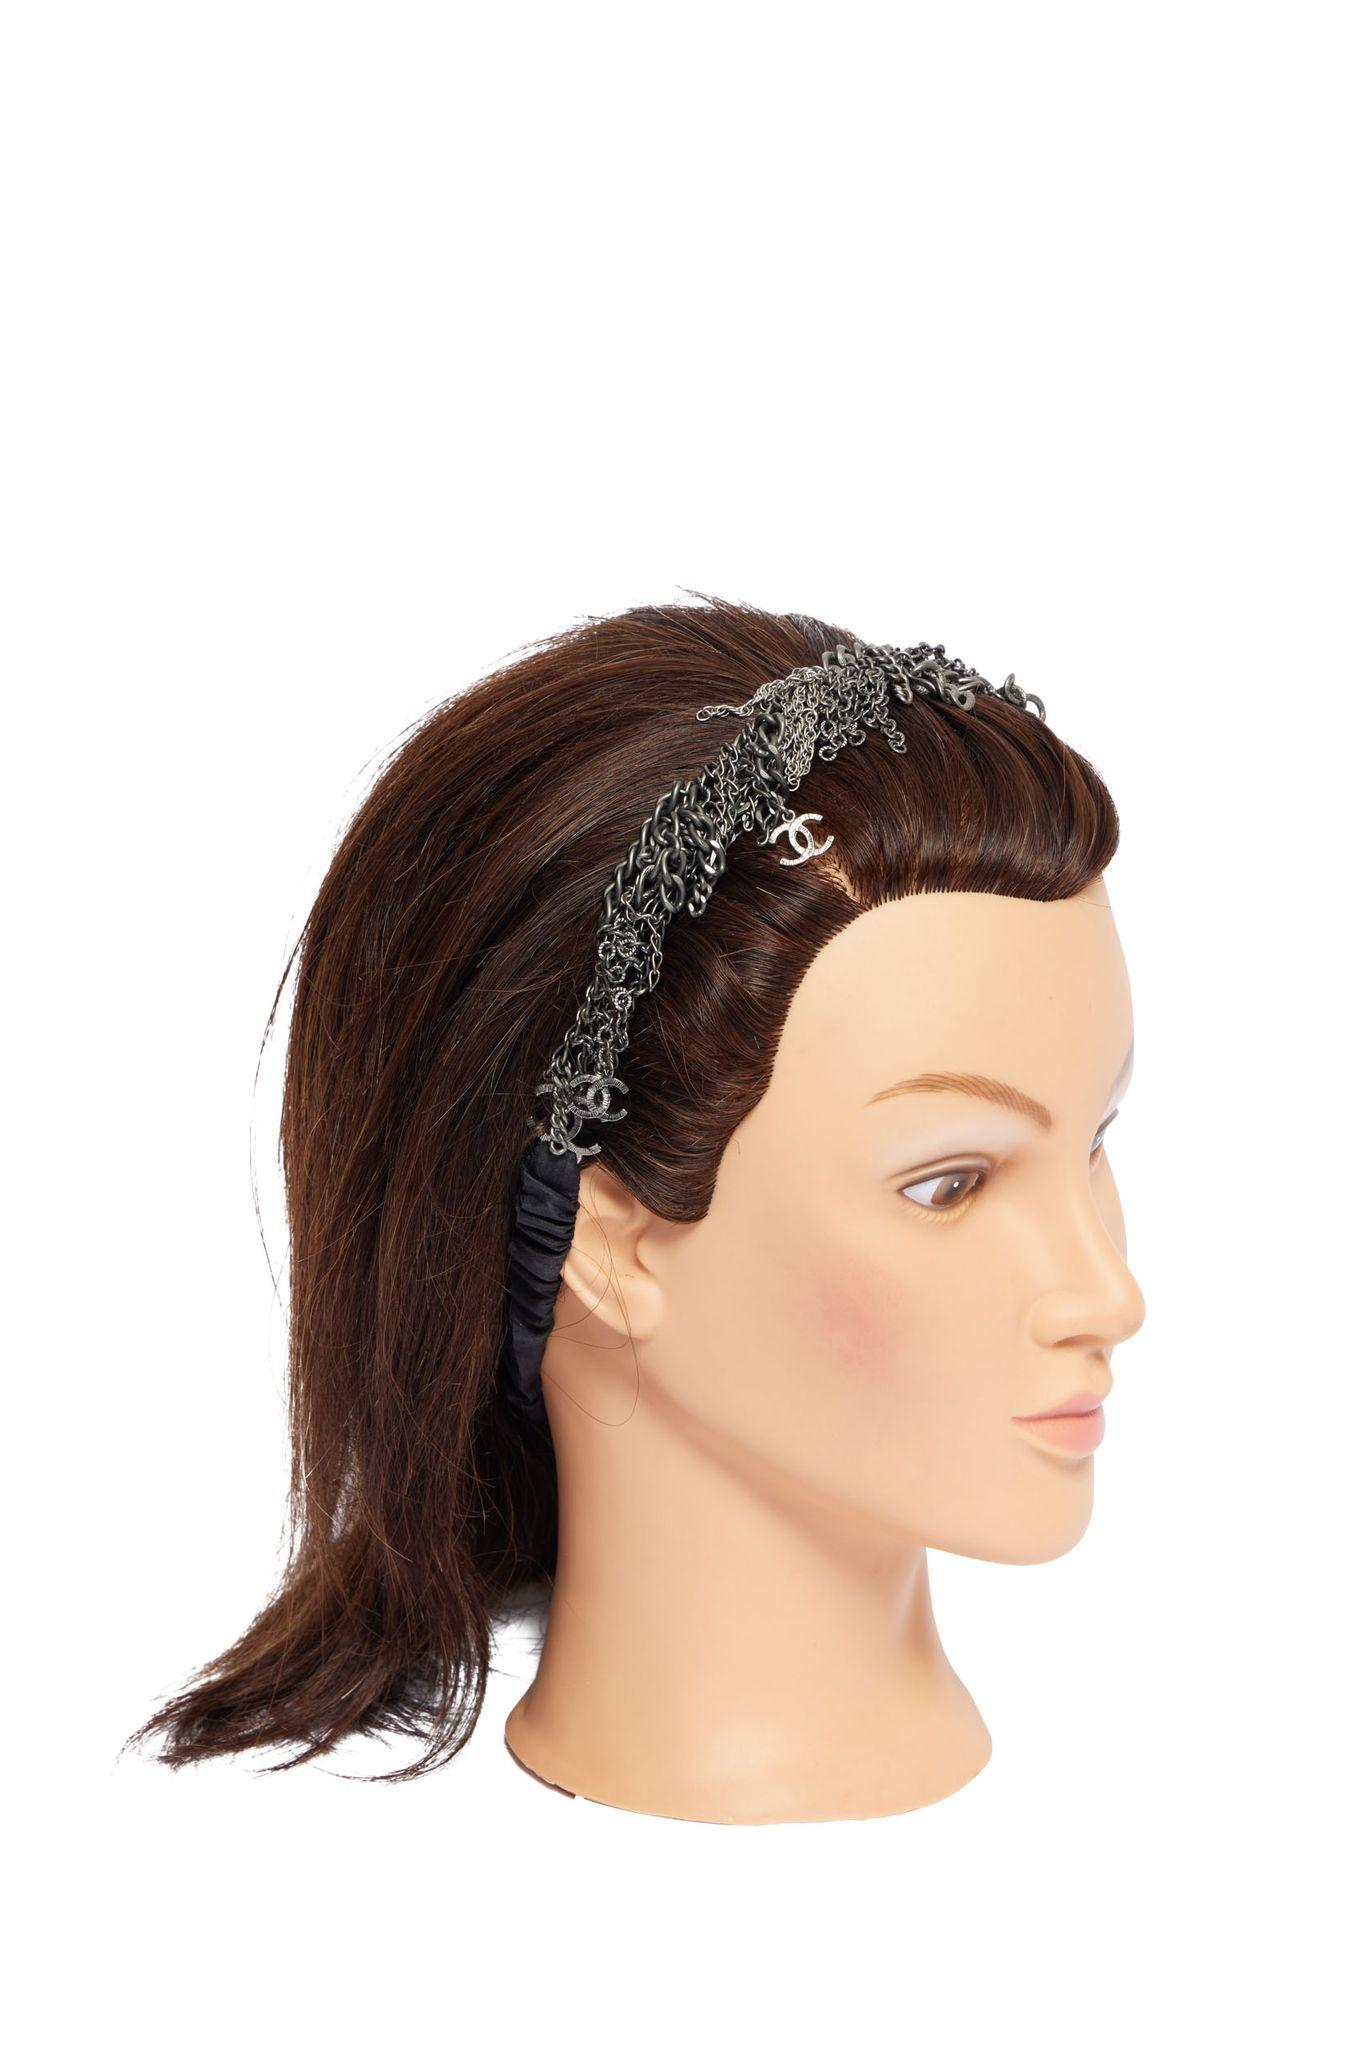 Chanel multi chain headband, one size fits all. Gunmetal and black silk. Comes with original pouch.